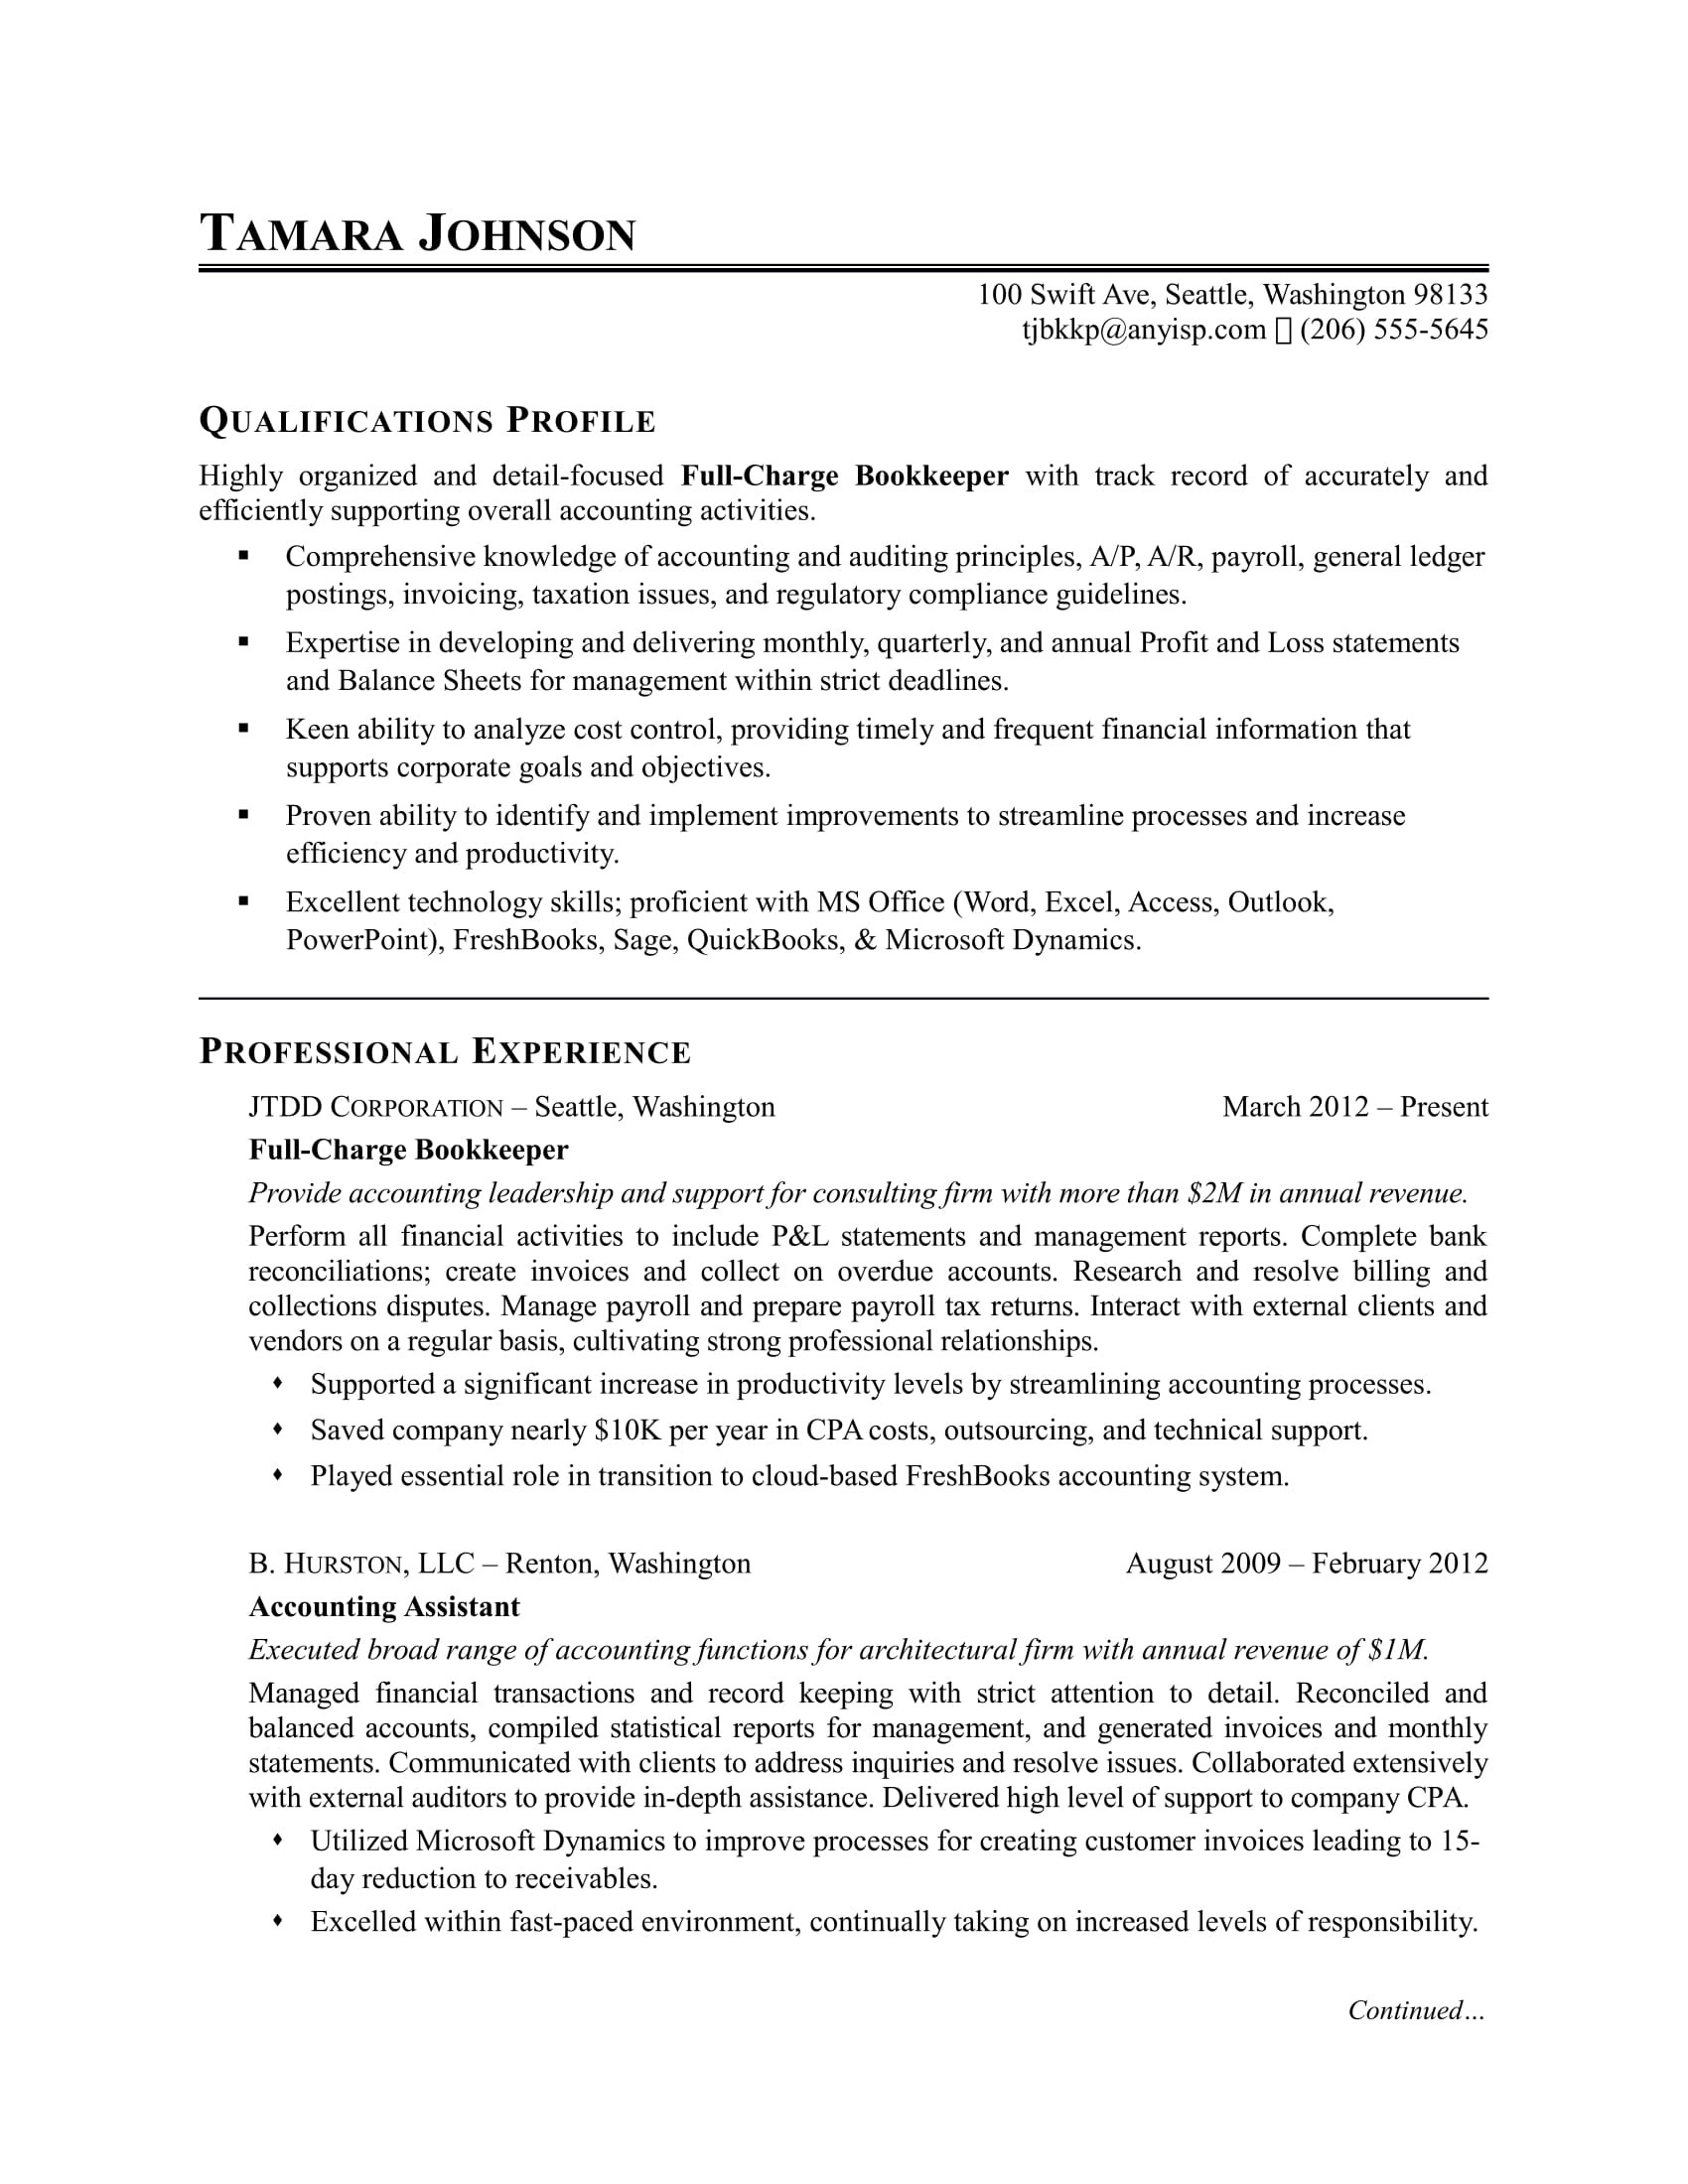 Sample Resume Accounting Promotion In the Same Company Bookkeeper Resume Sample Monster.com